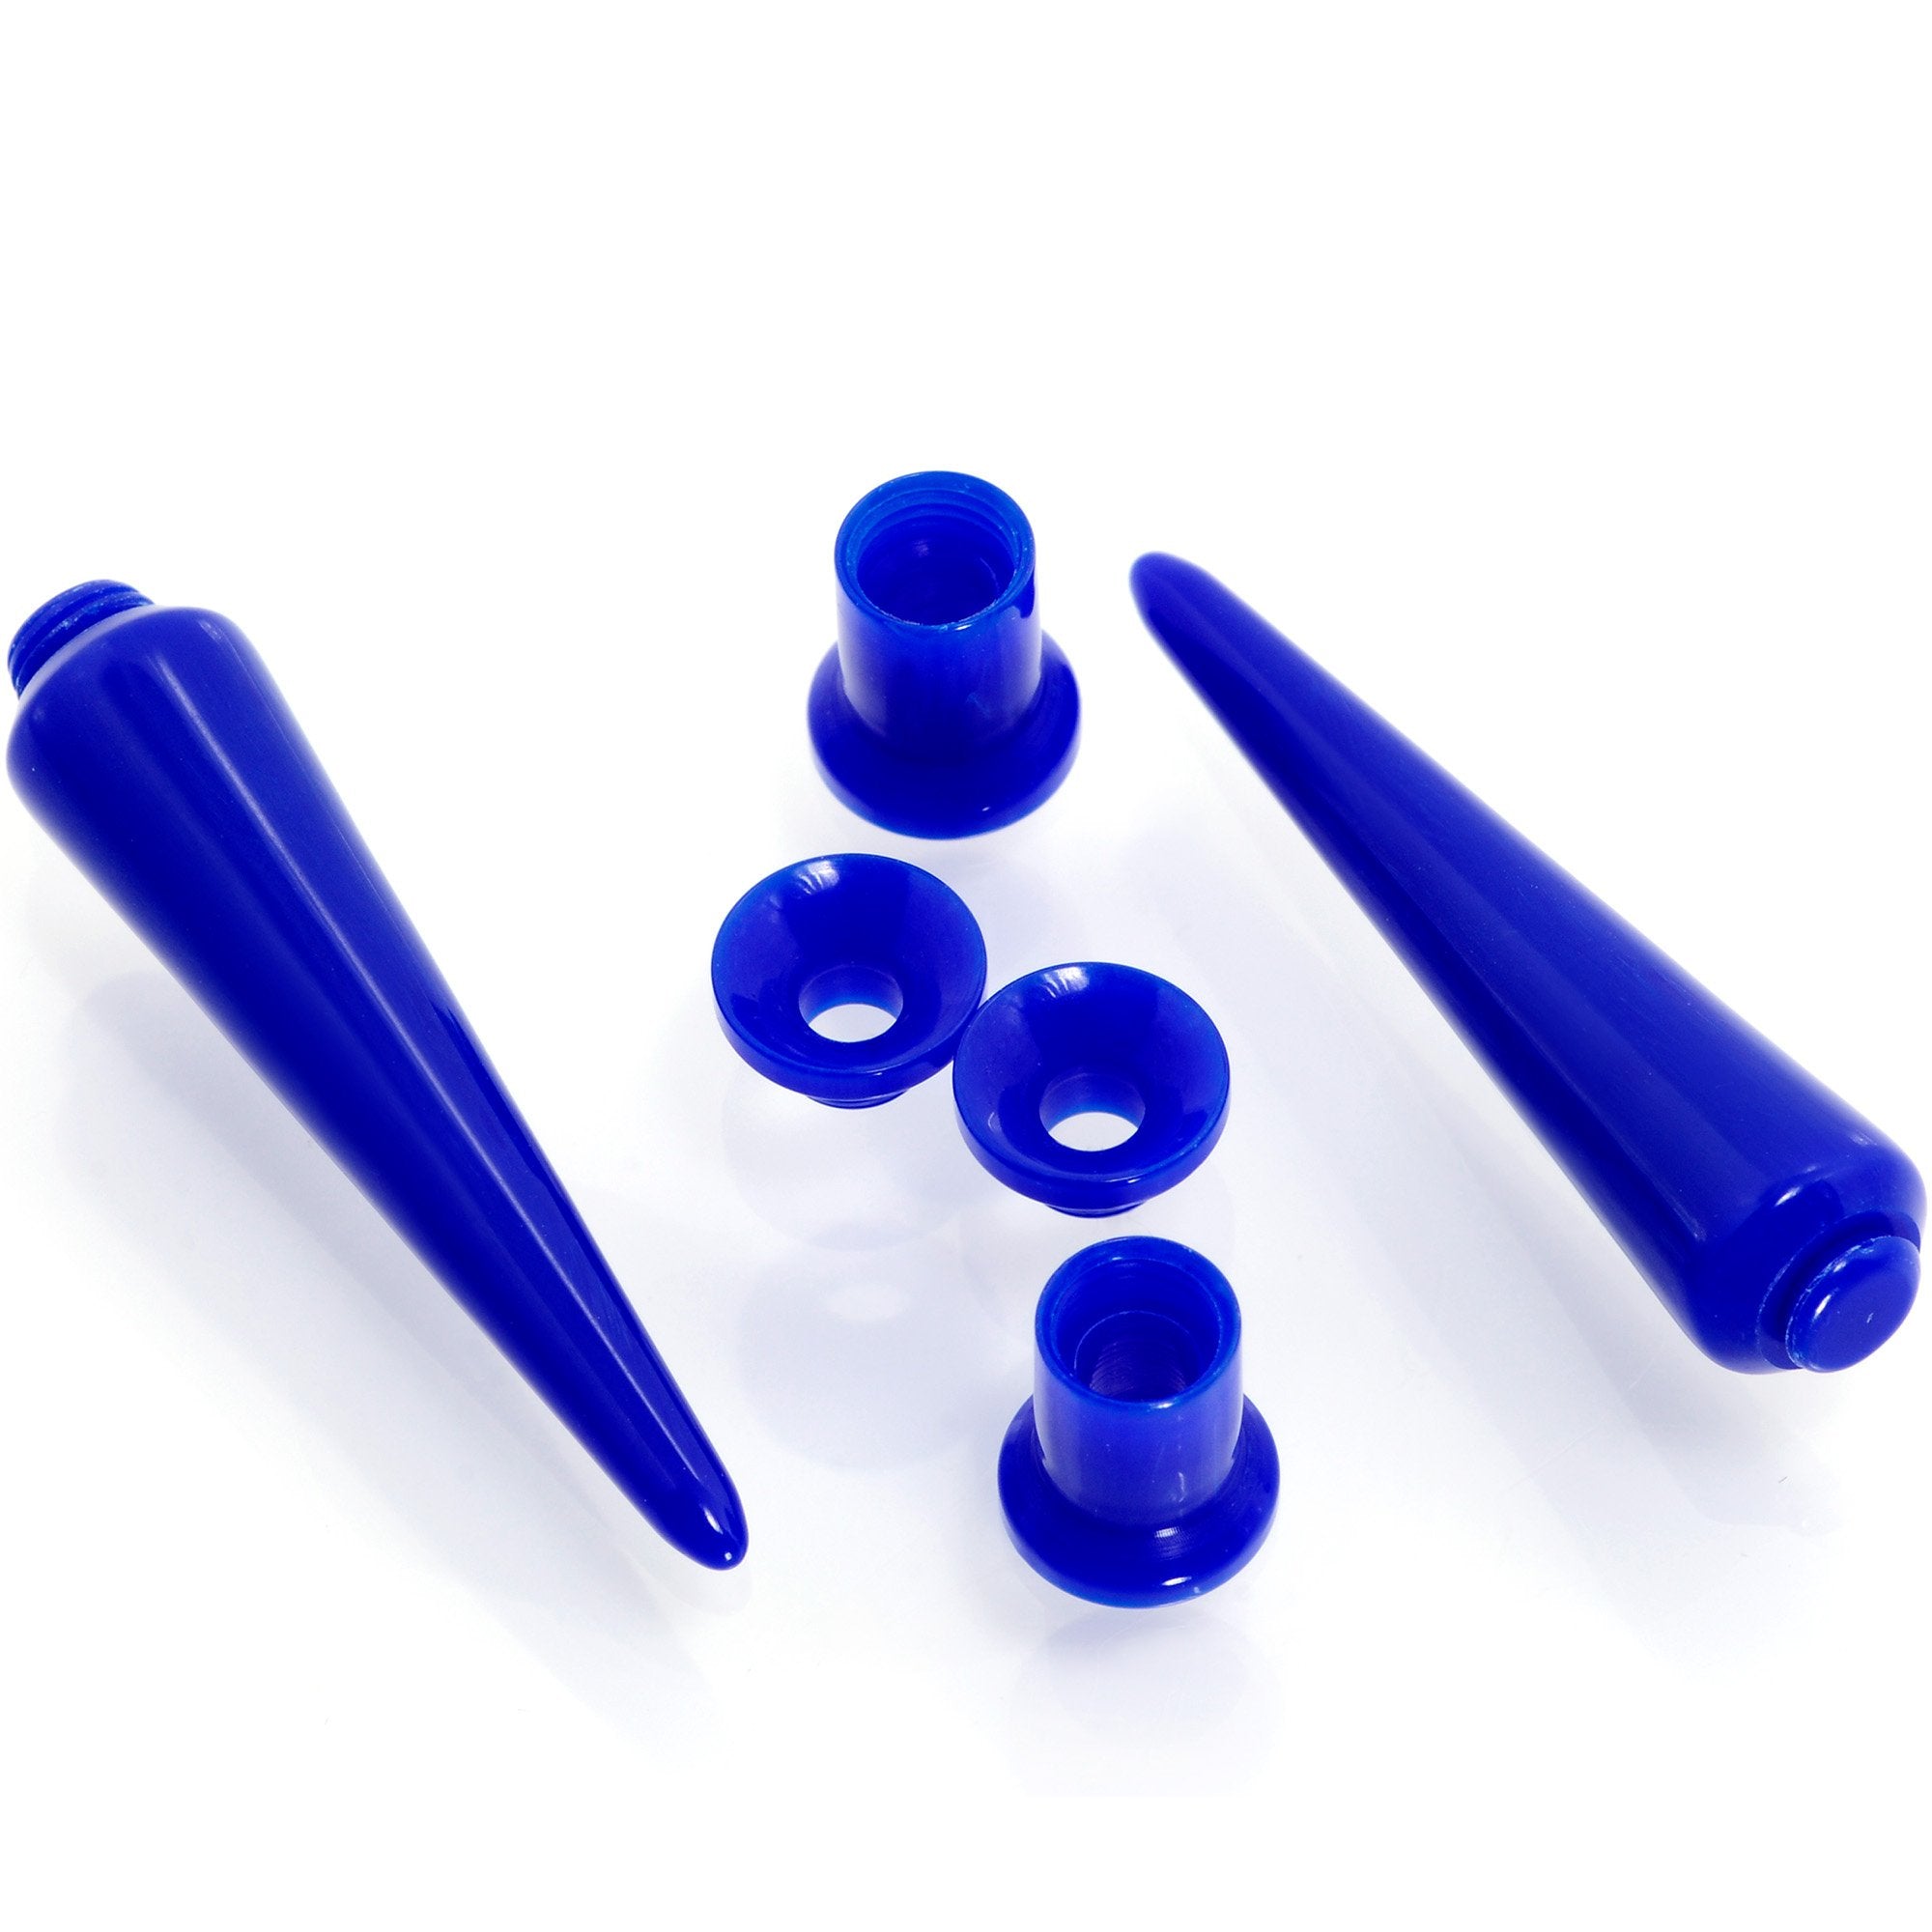 Blue 2 in 1 Interchangeable Screw Fit Plug and Taper Set